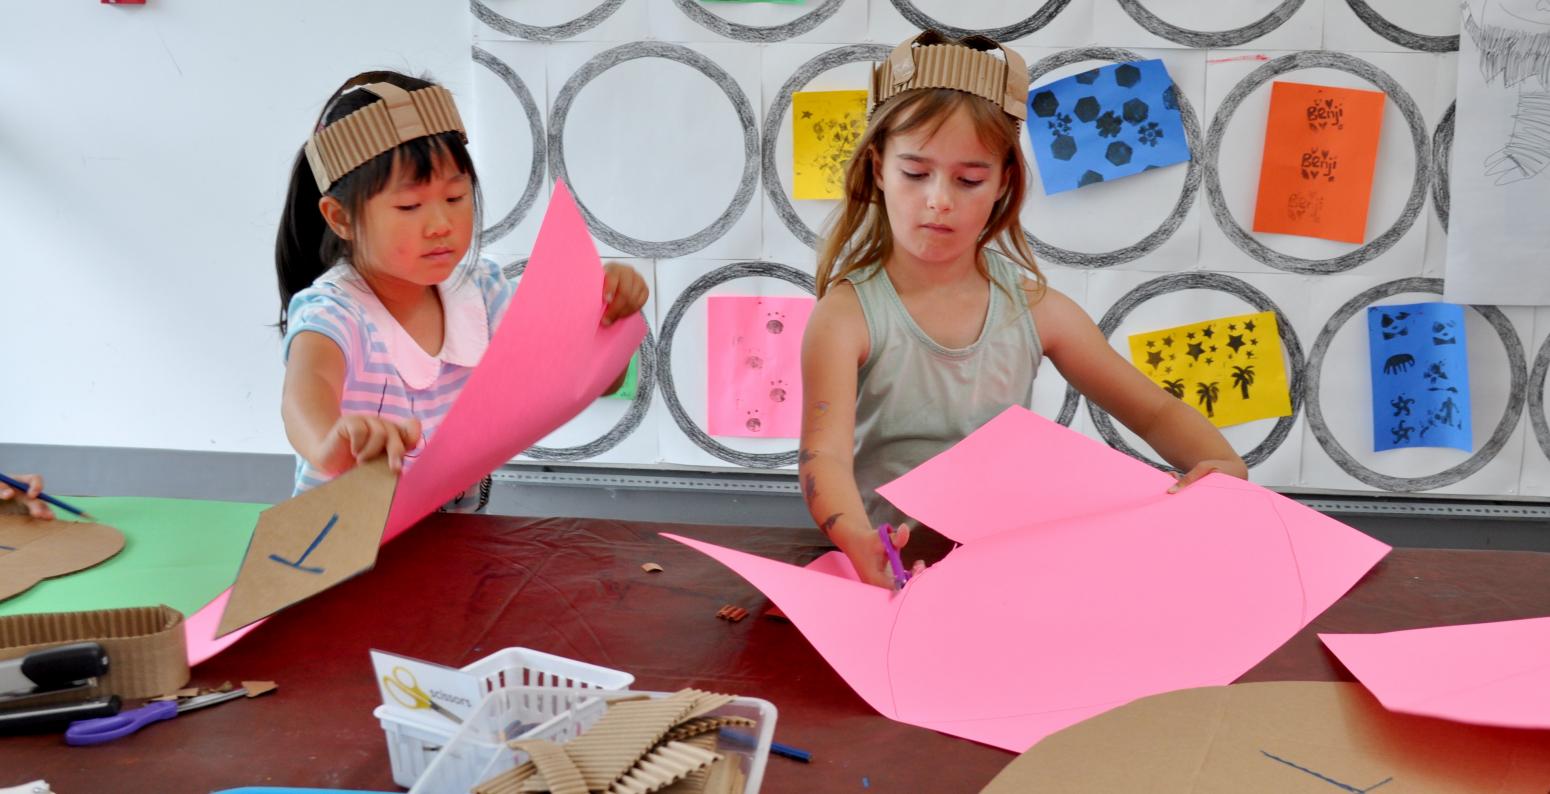 Two children making their own costumes, wearing cardboard hats and cutting pink paper.